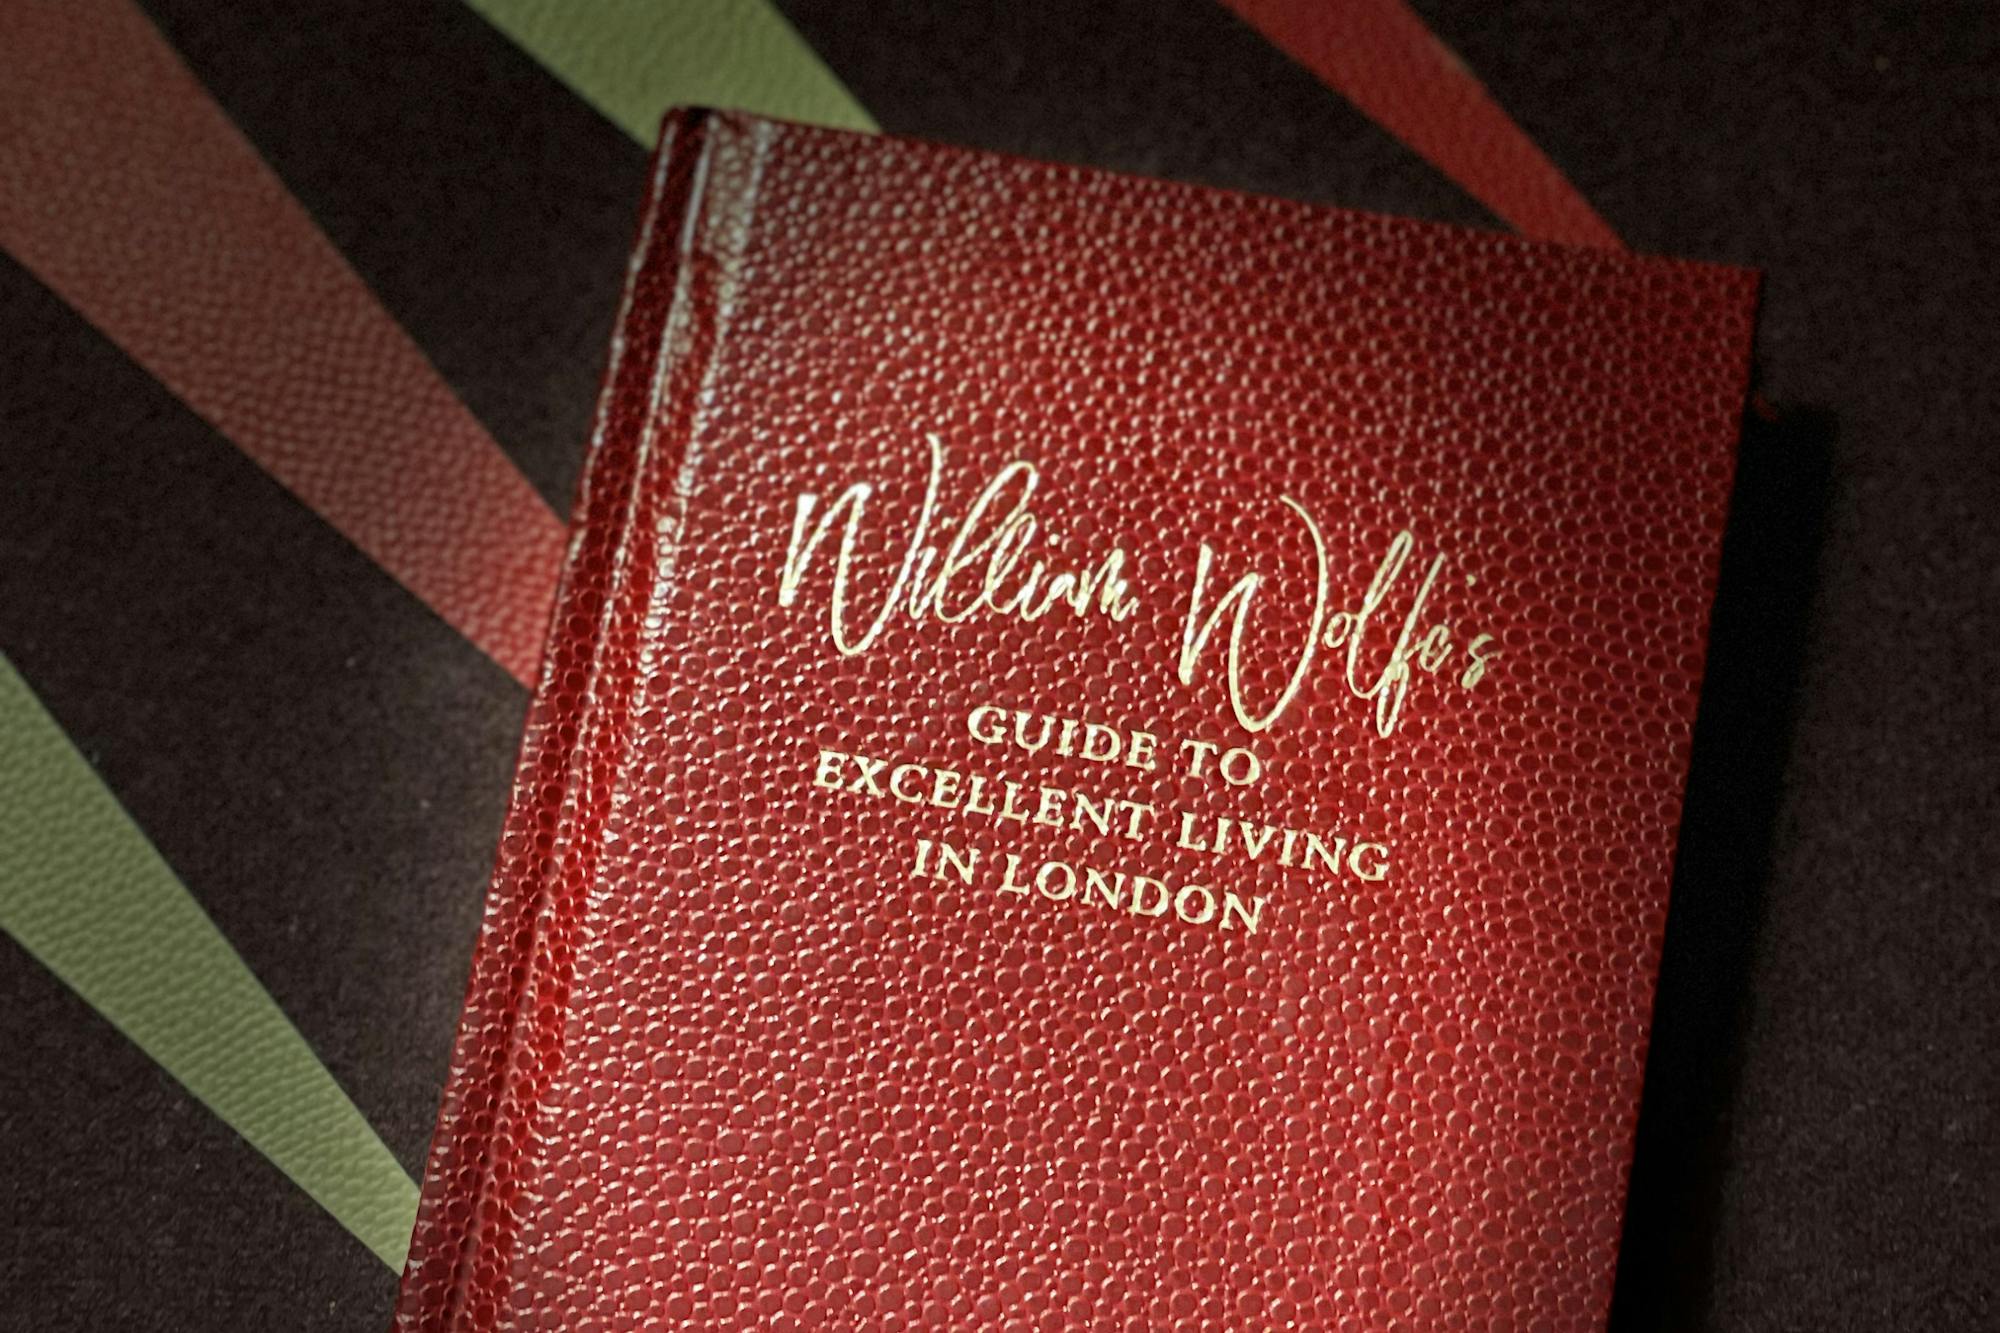 Walpole Weekend William Wolfe’s Guide To Excellent Living In London: Henry Poole & Co. 